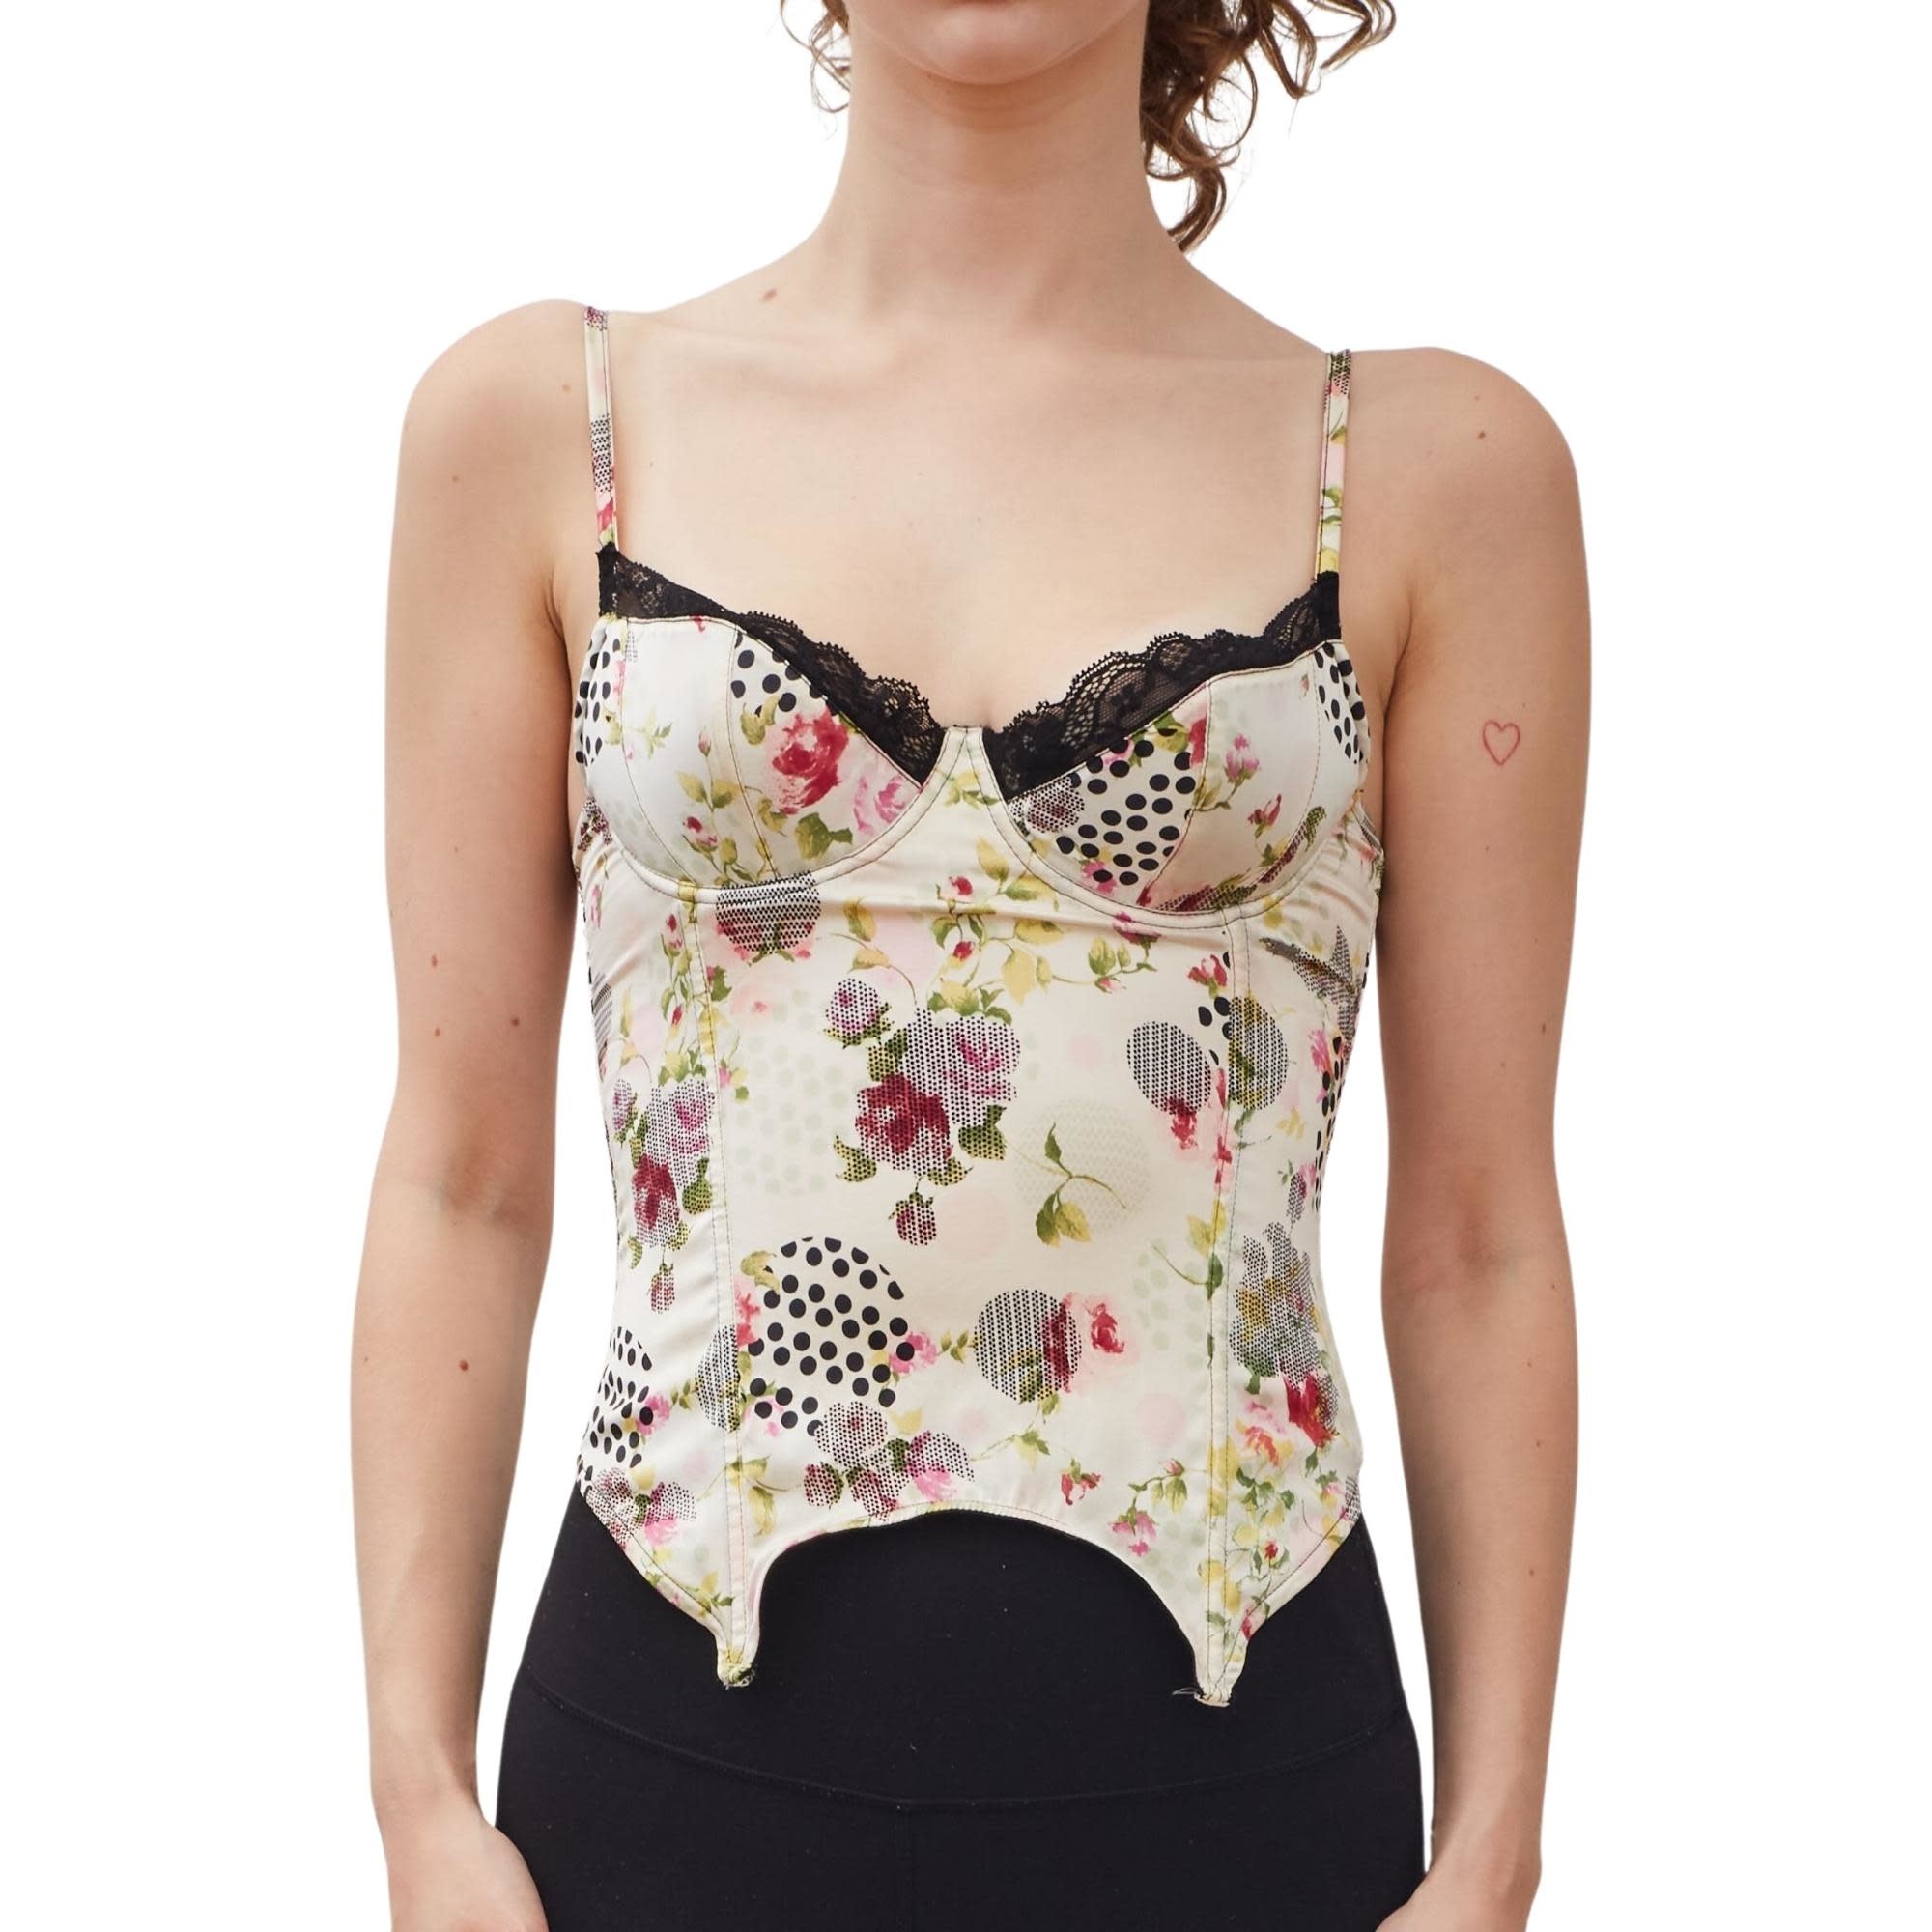 DIOR FLORAL CREAM BUSTIER AND BOTTOM (SMALL